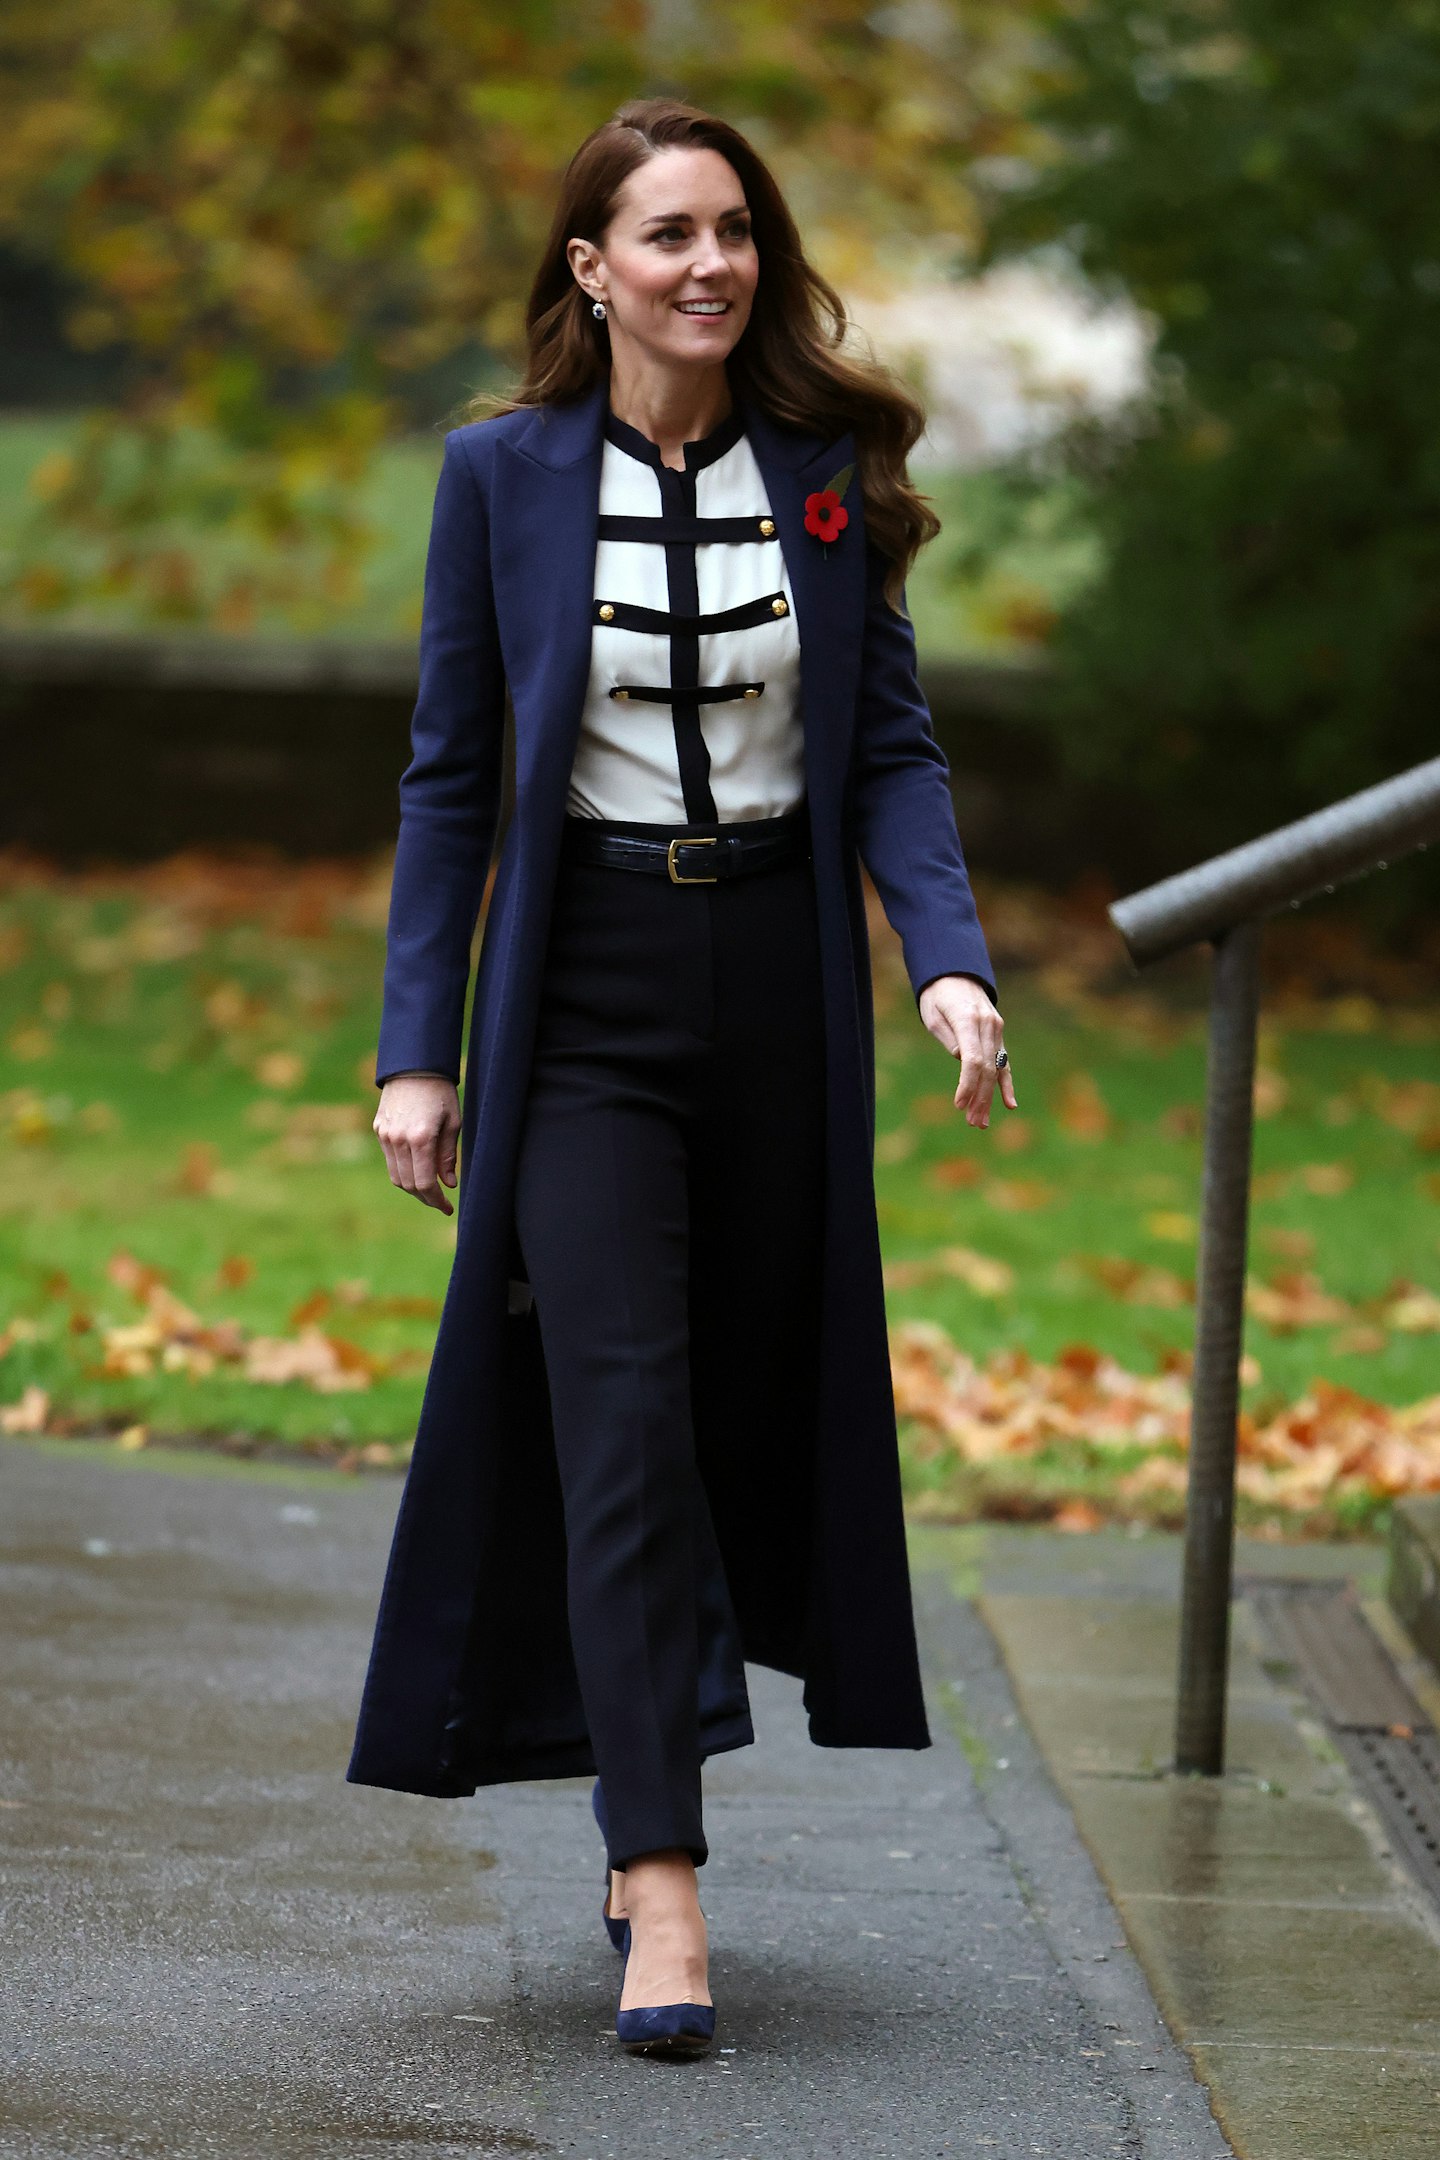 Kate Middleton wearing a navy coat from Catherine Walker